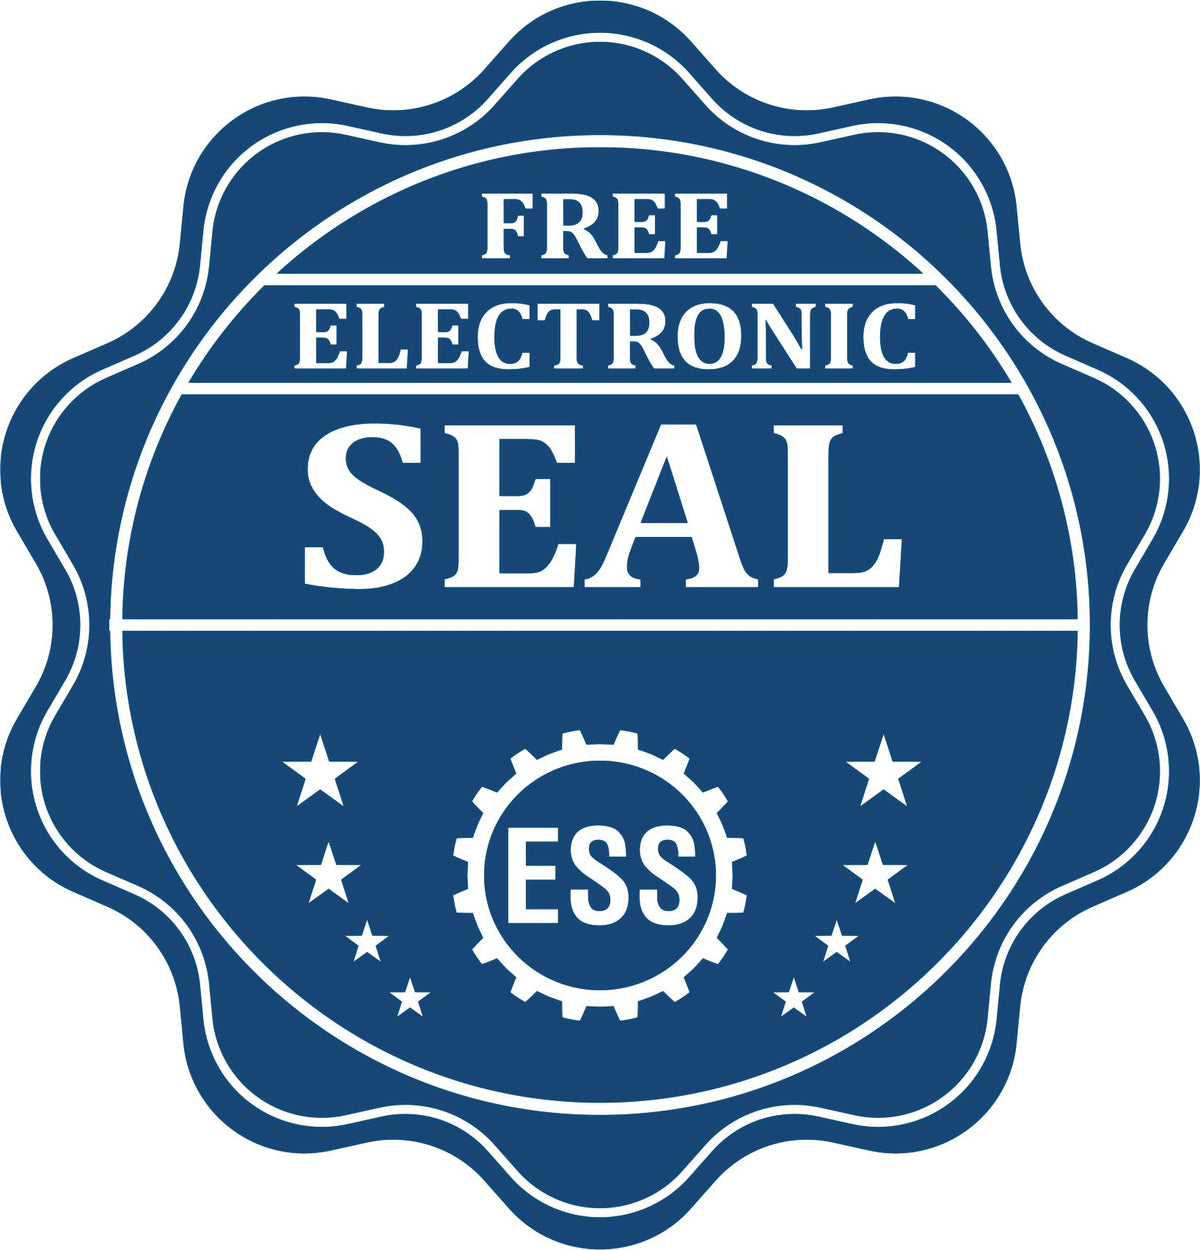 A badge showing a free electronic seal for the Premium MaxLight Pre-Inked Ohio Geology Stamp with stars and the ESS gear on the emblem.